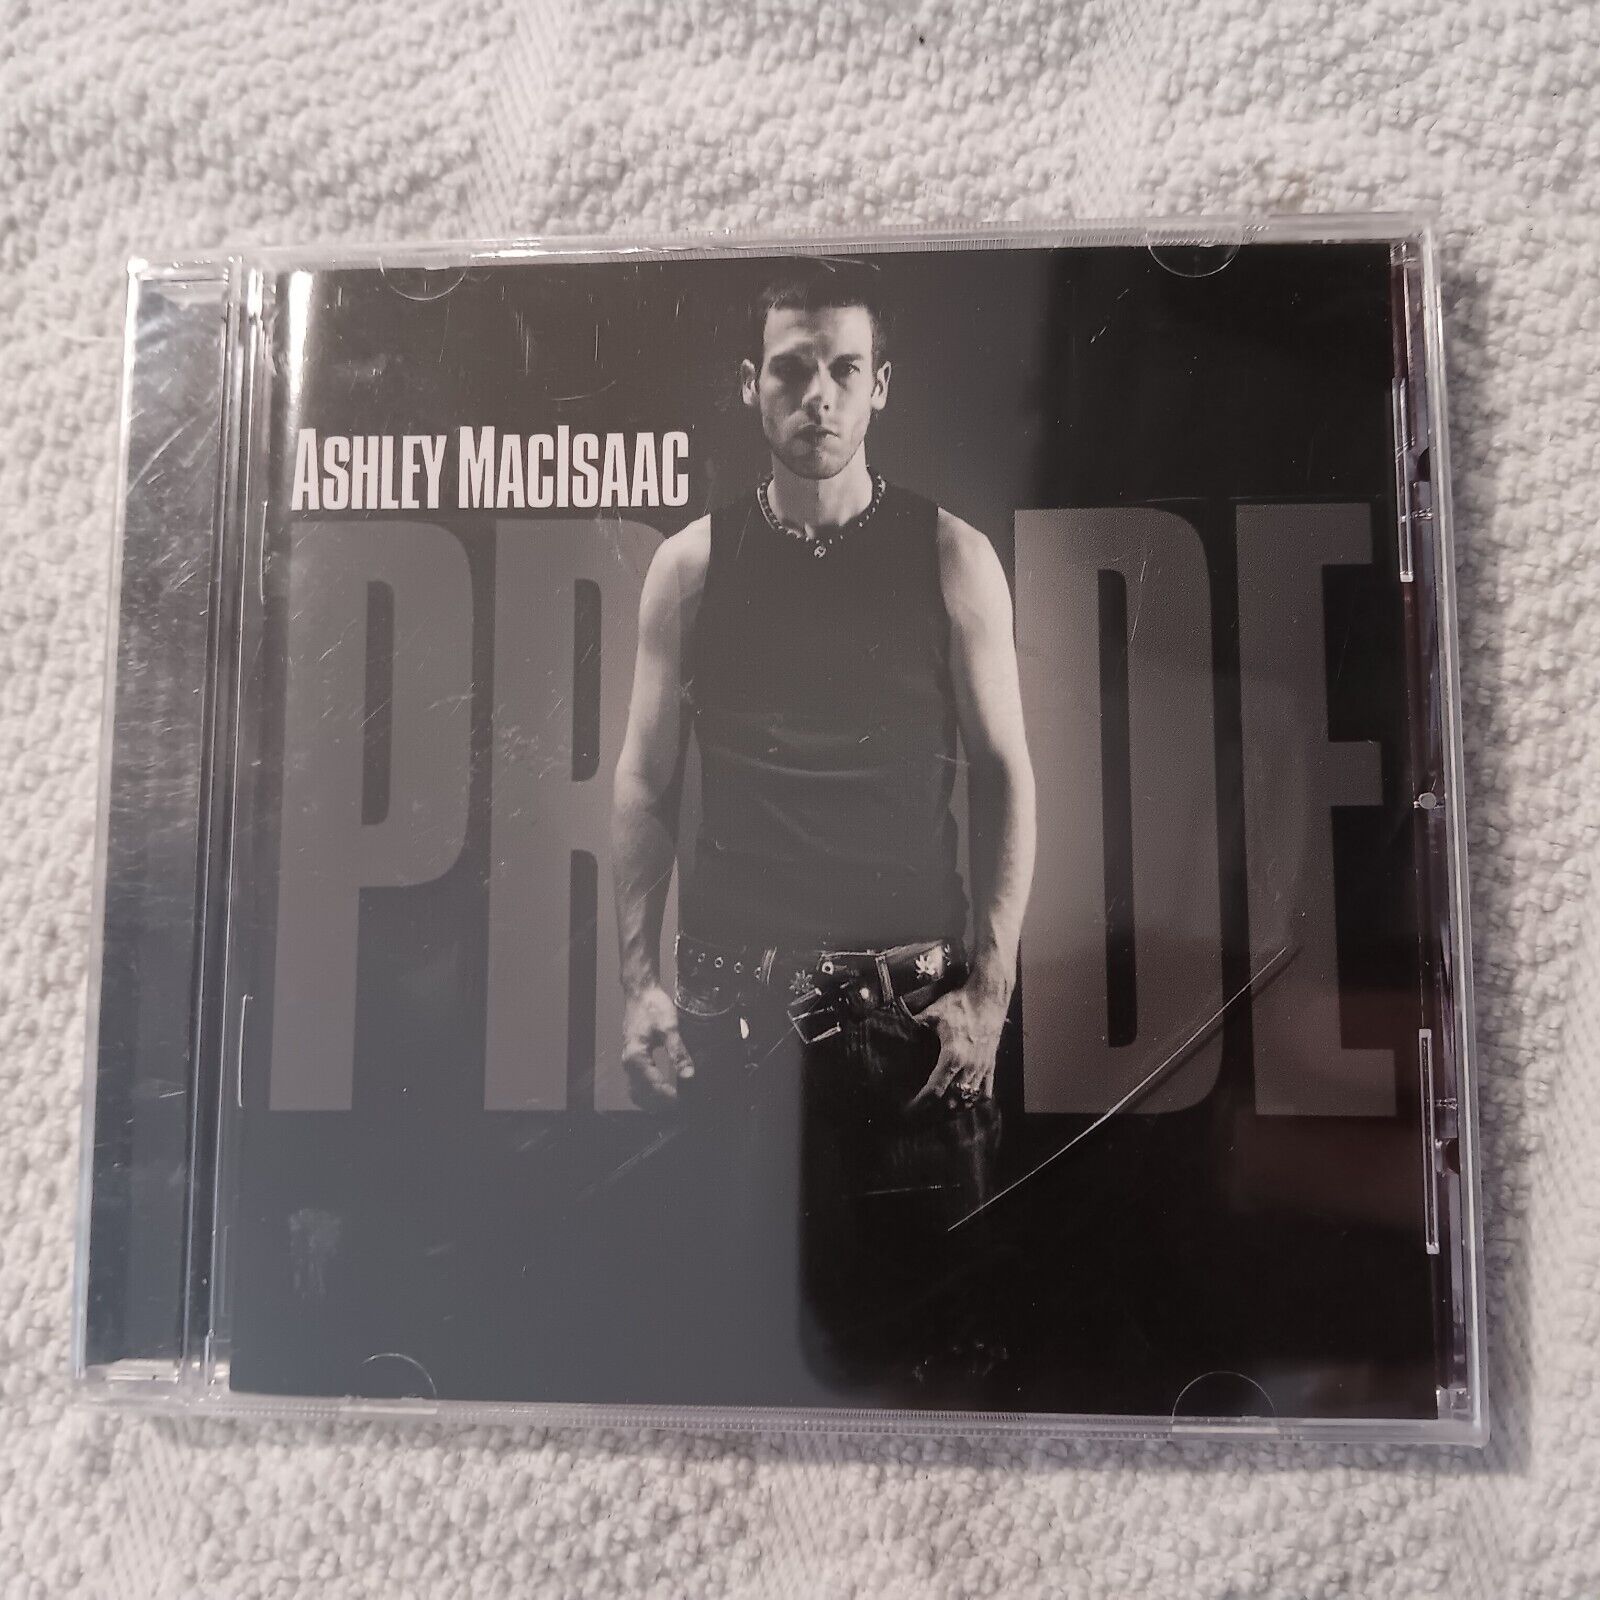 Pride by Ashley Macisaac (CD, 2006, Linus Entertainment) Brand New Sealed Music